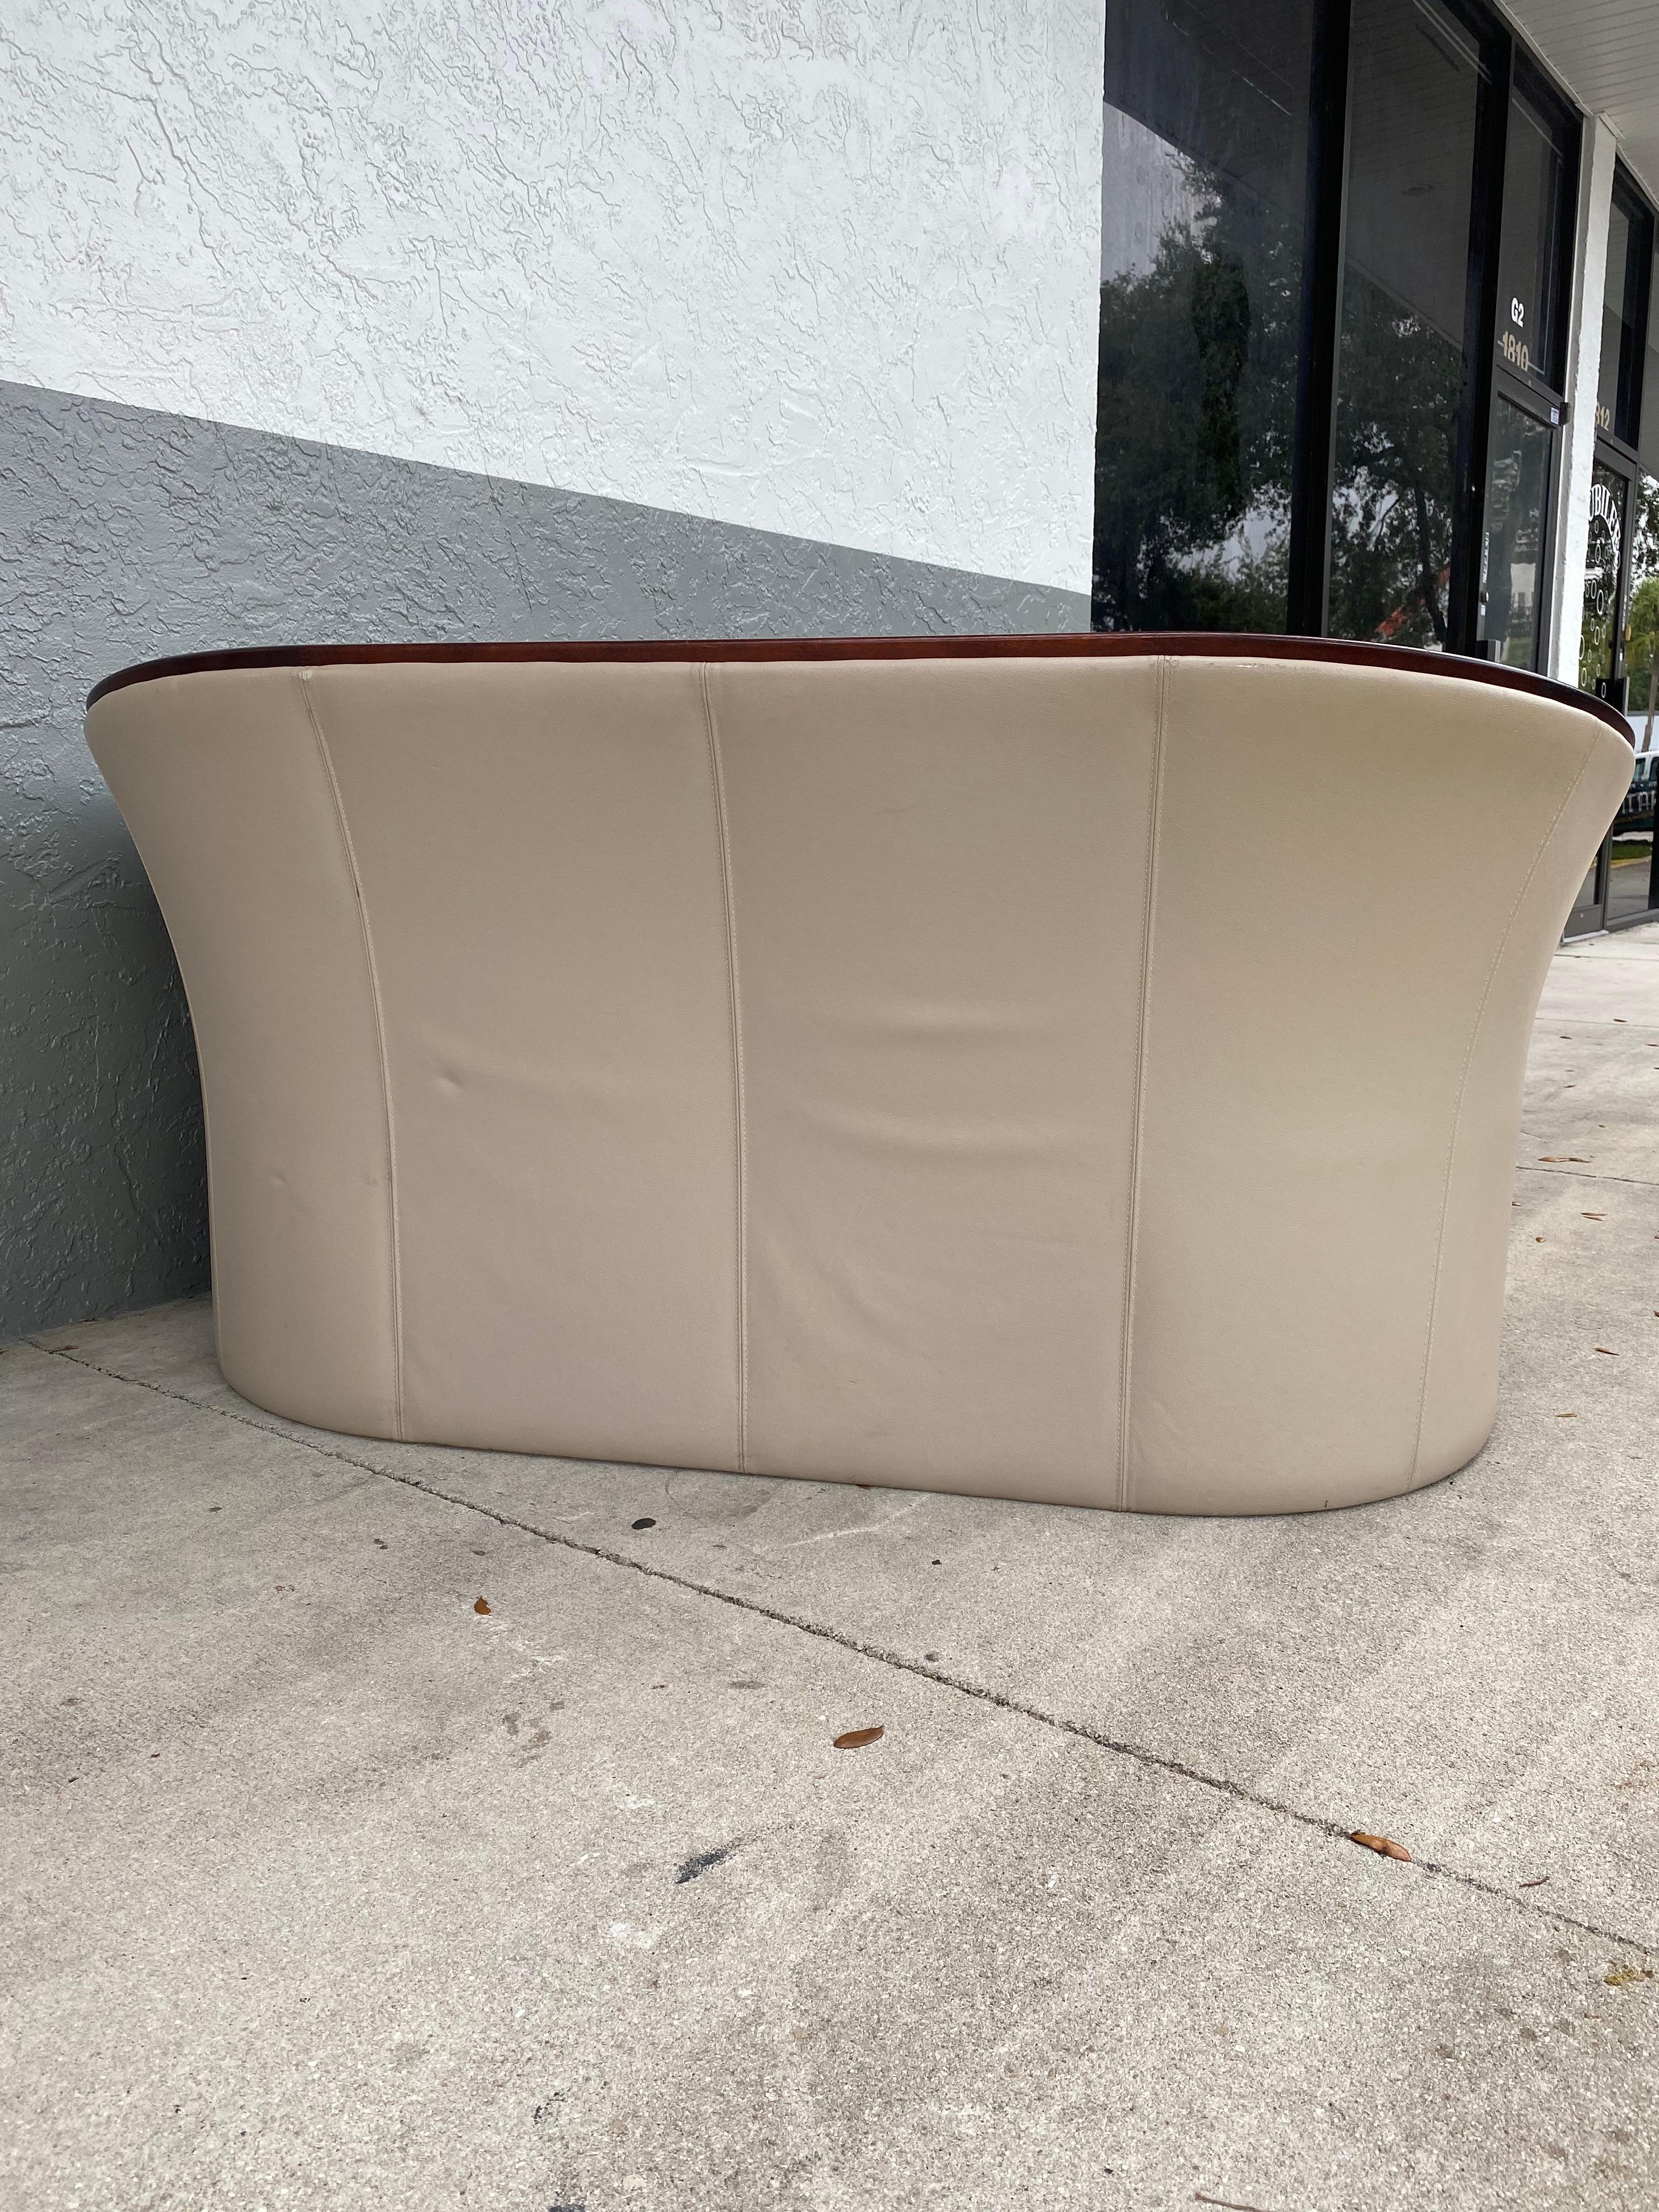 1970s Ekornes Curved Leather Wood Sofa Settee and Barrel Chair Set In Good Condition For Sale In Fort Lauderdale, FL